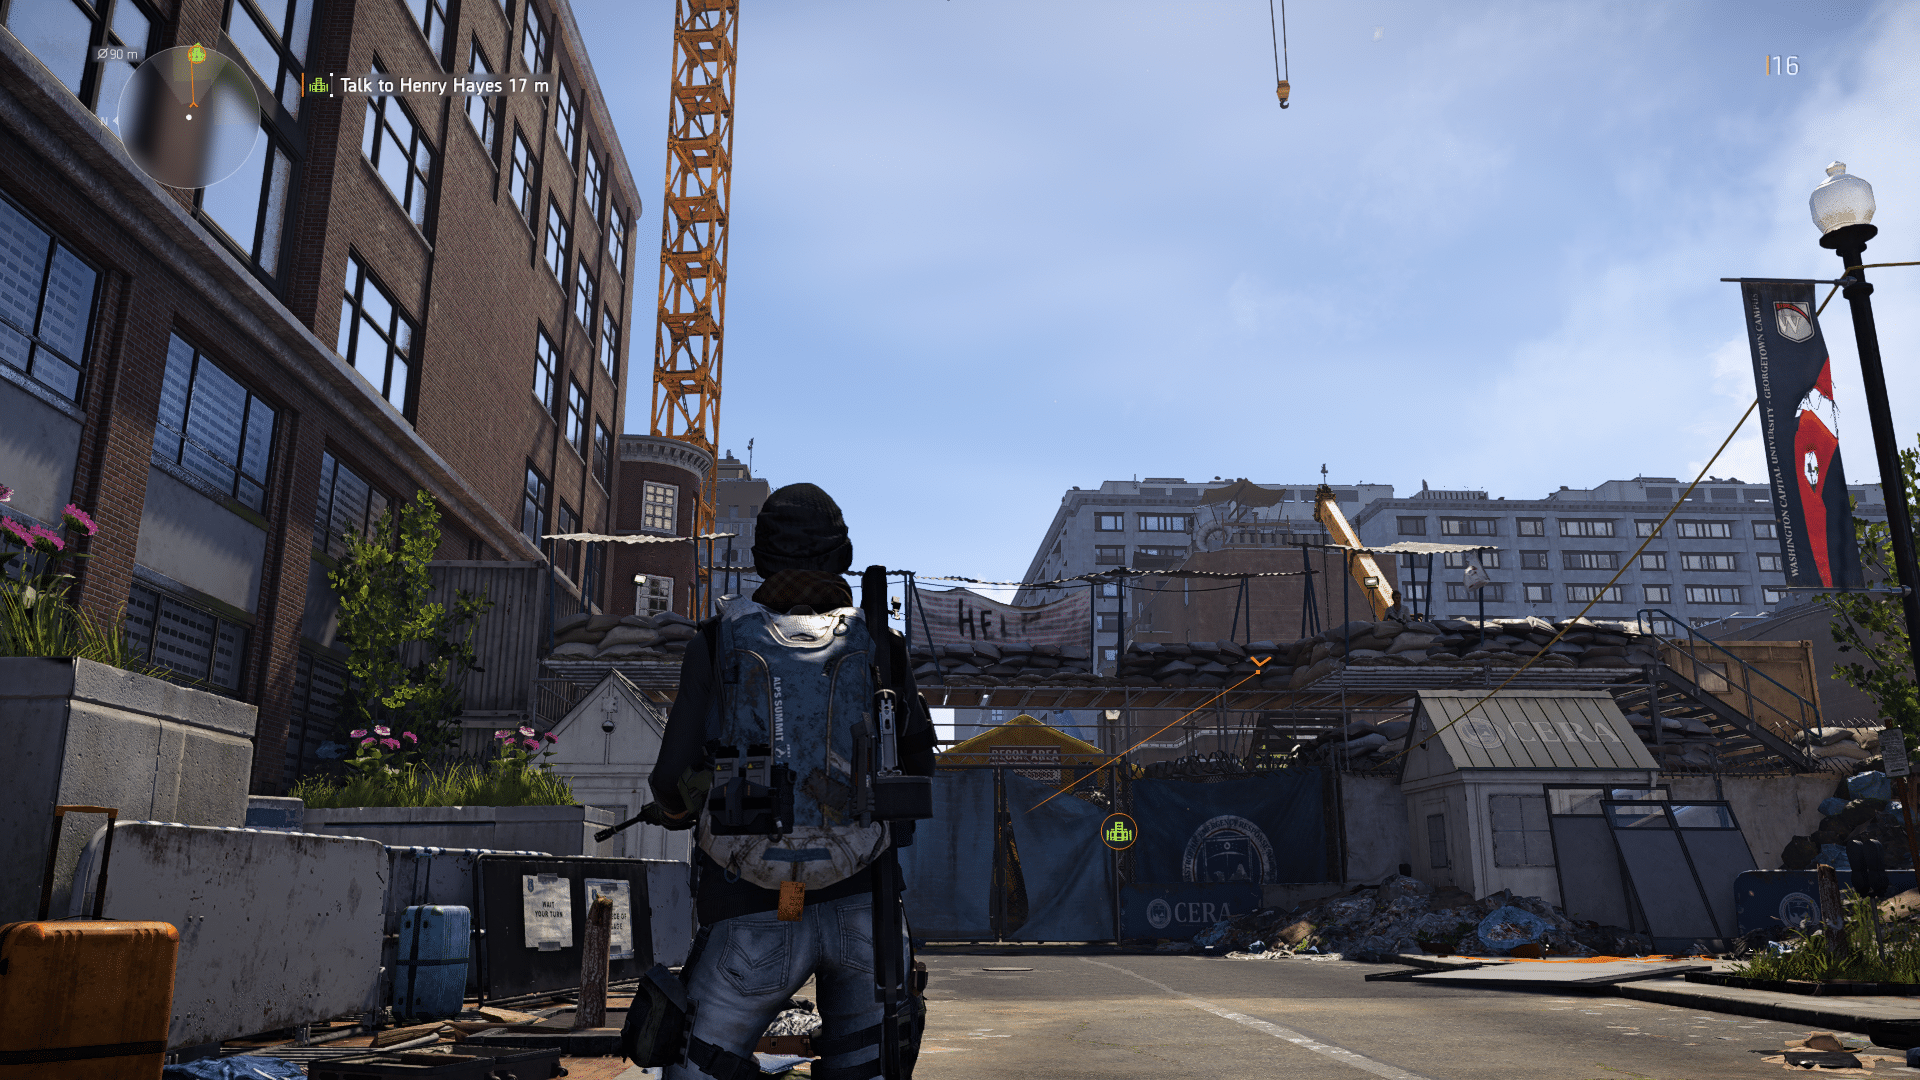 TheDivision2 4 7 2019 9 59 05 PM 548